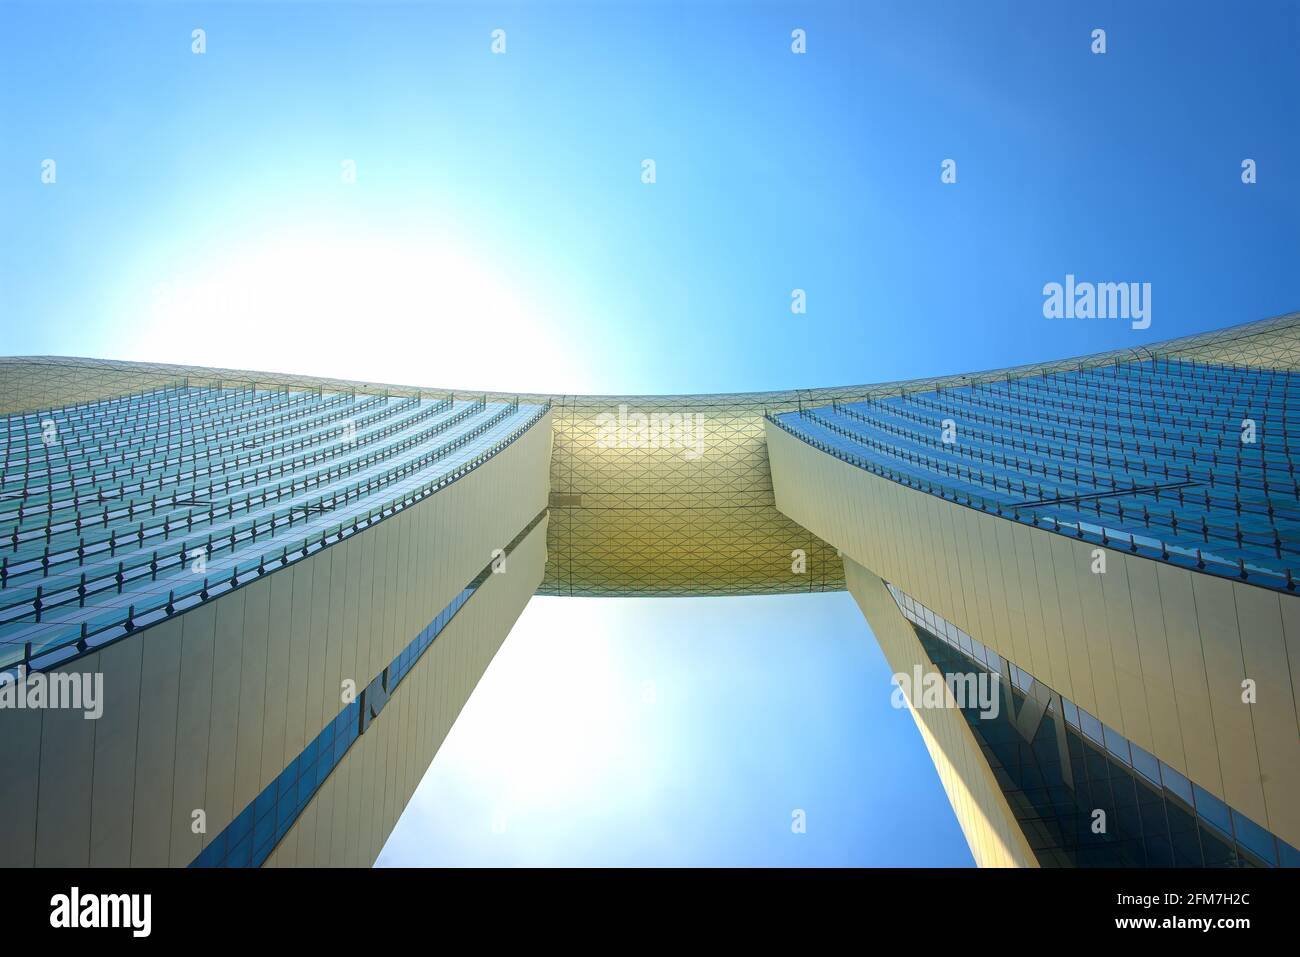 Perspective view of landmark Marina Bay Sands and skybridge against blue sky in Marina Bay, Singapore Stock Photo